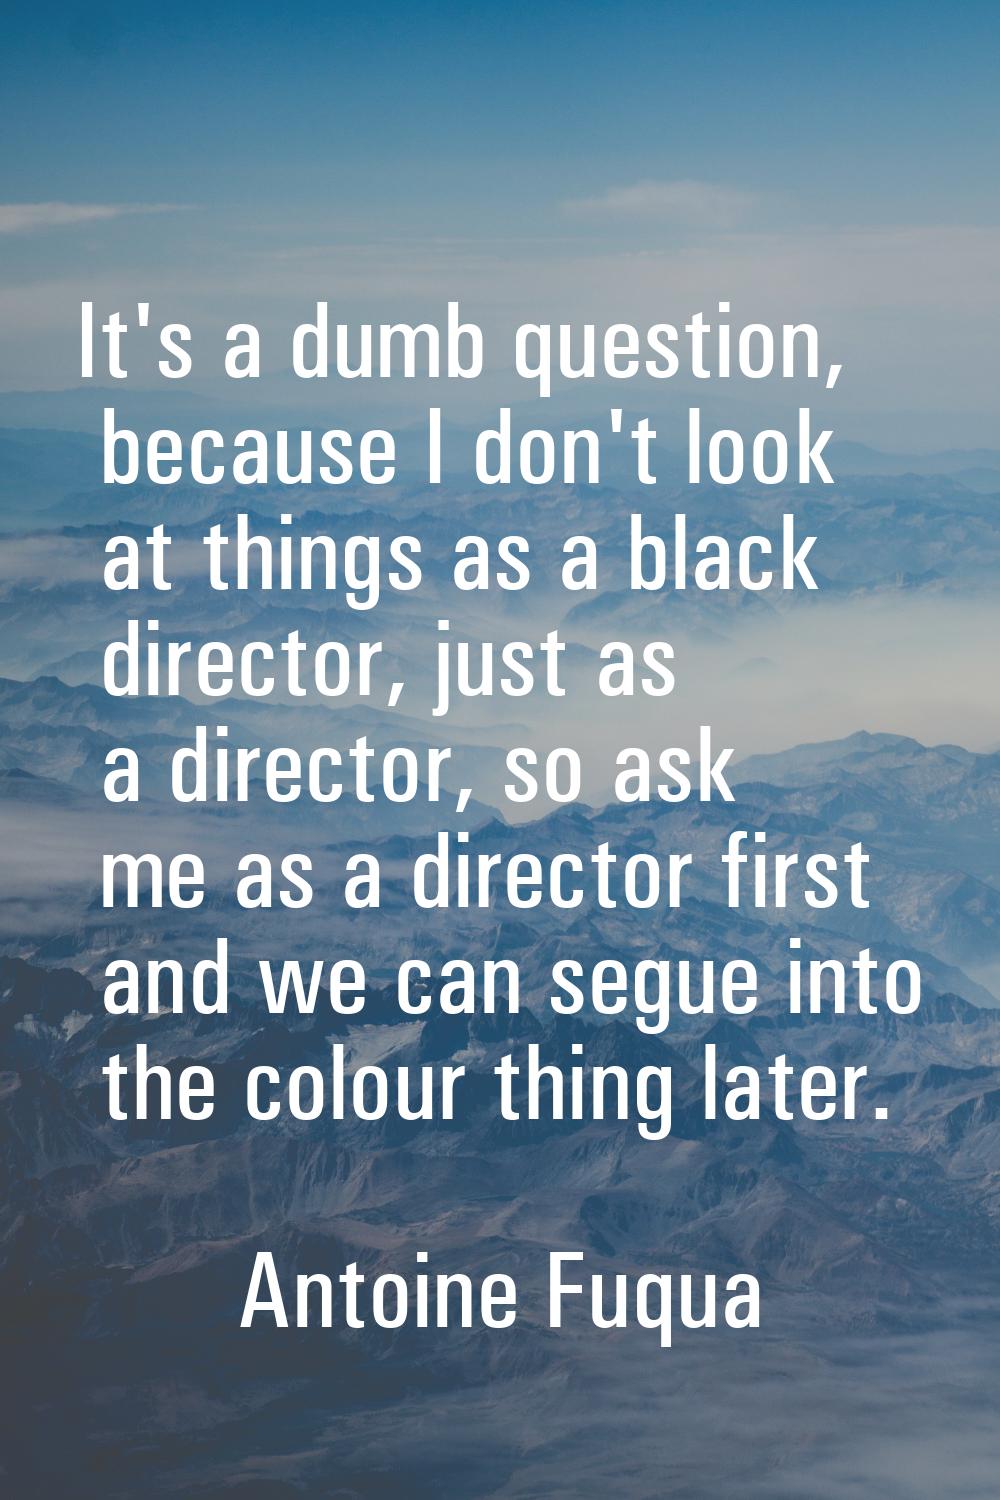 It's a dumb question, because I don't look at things as a black director, just as a director, so as